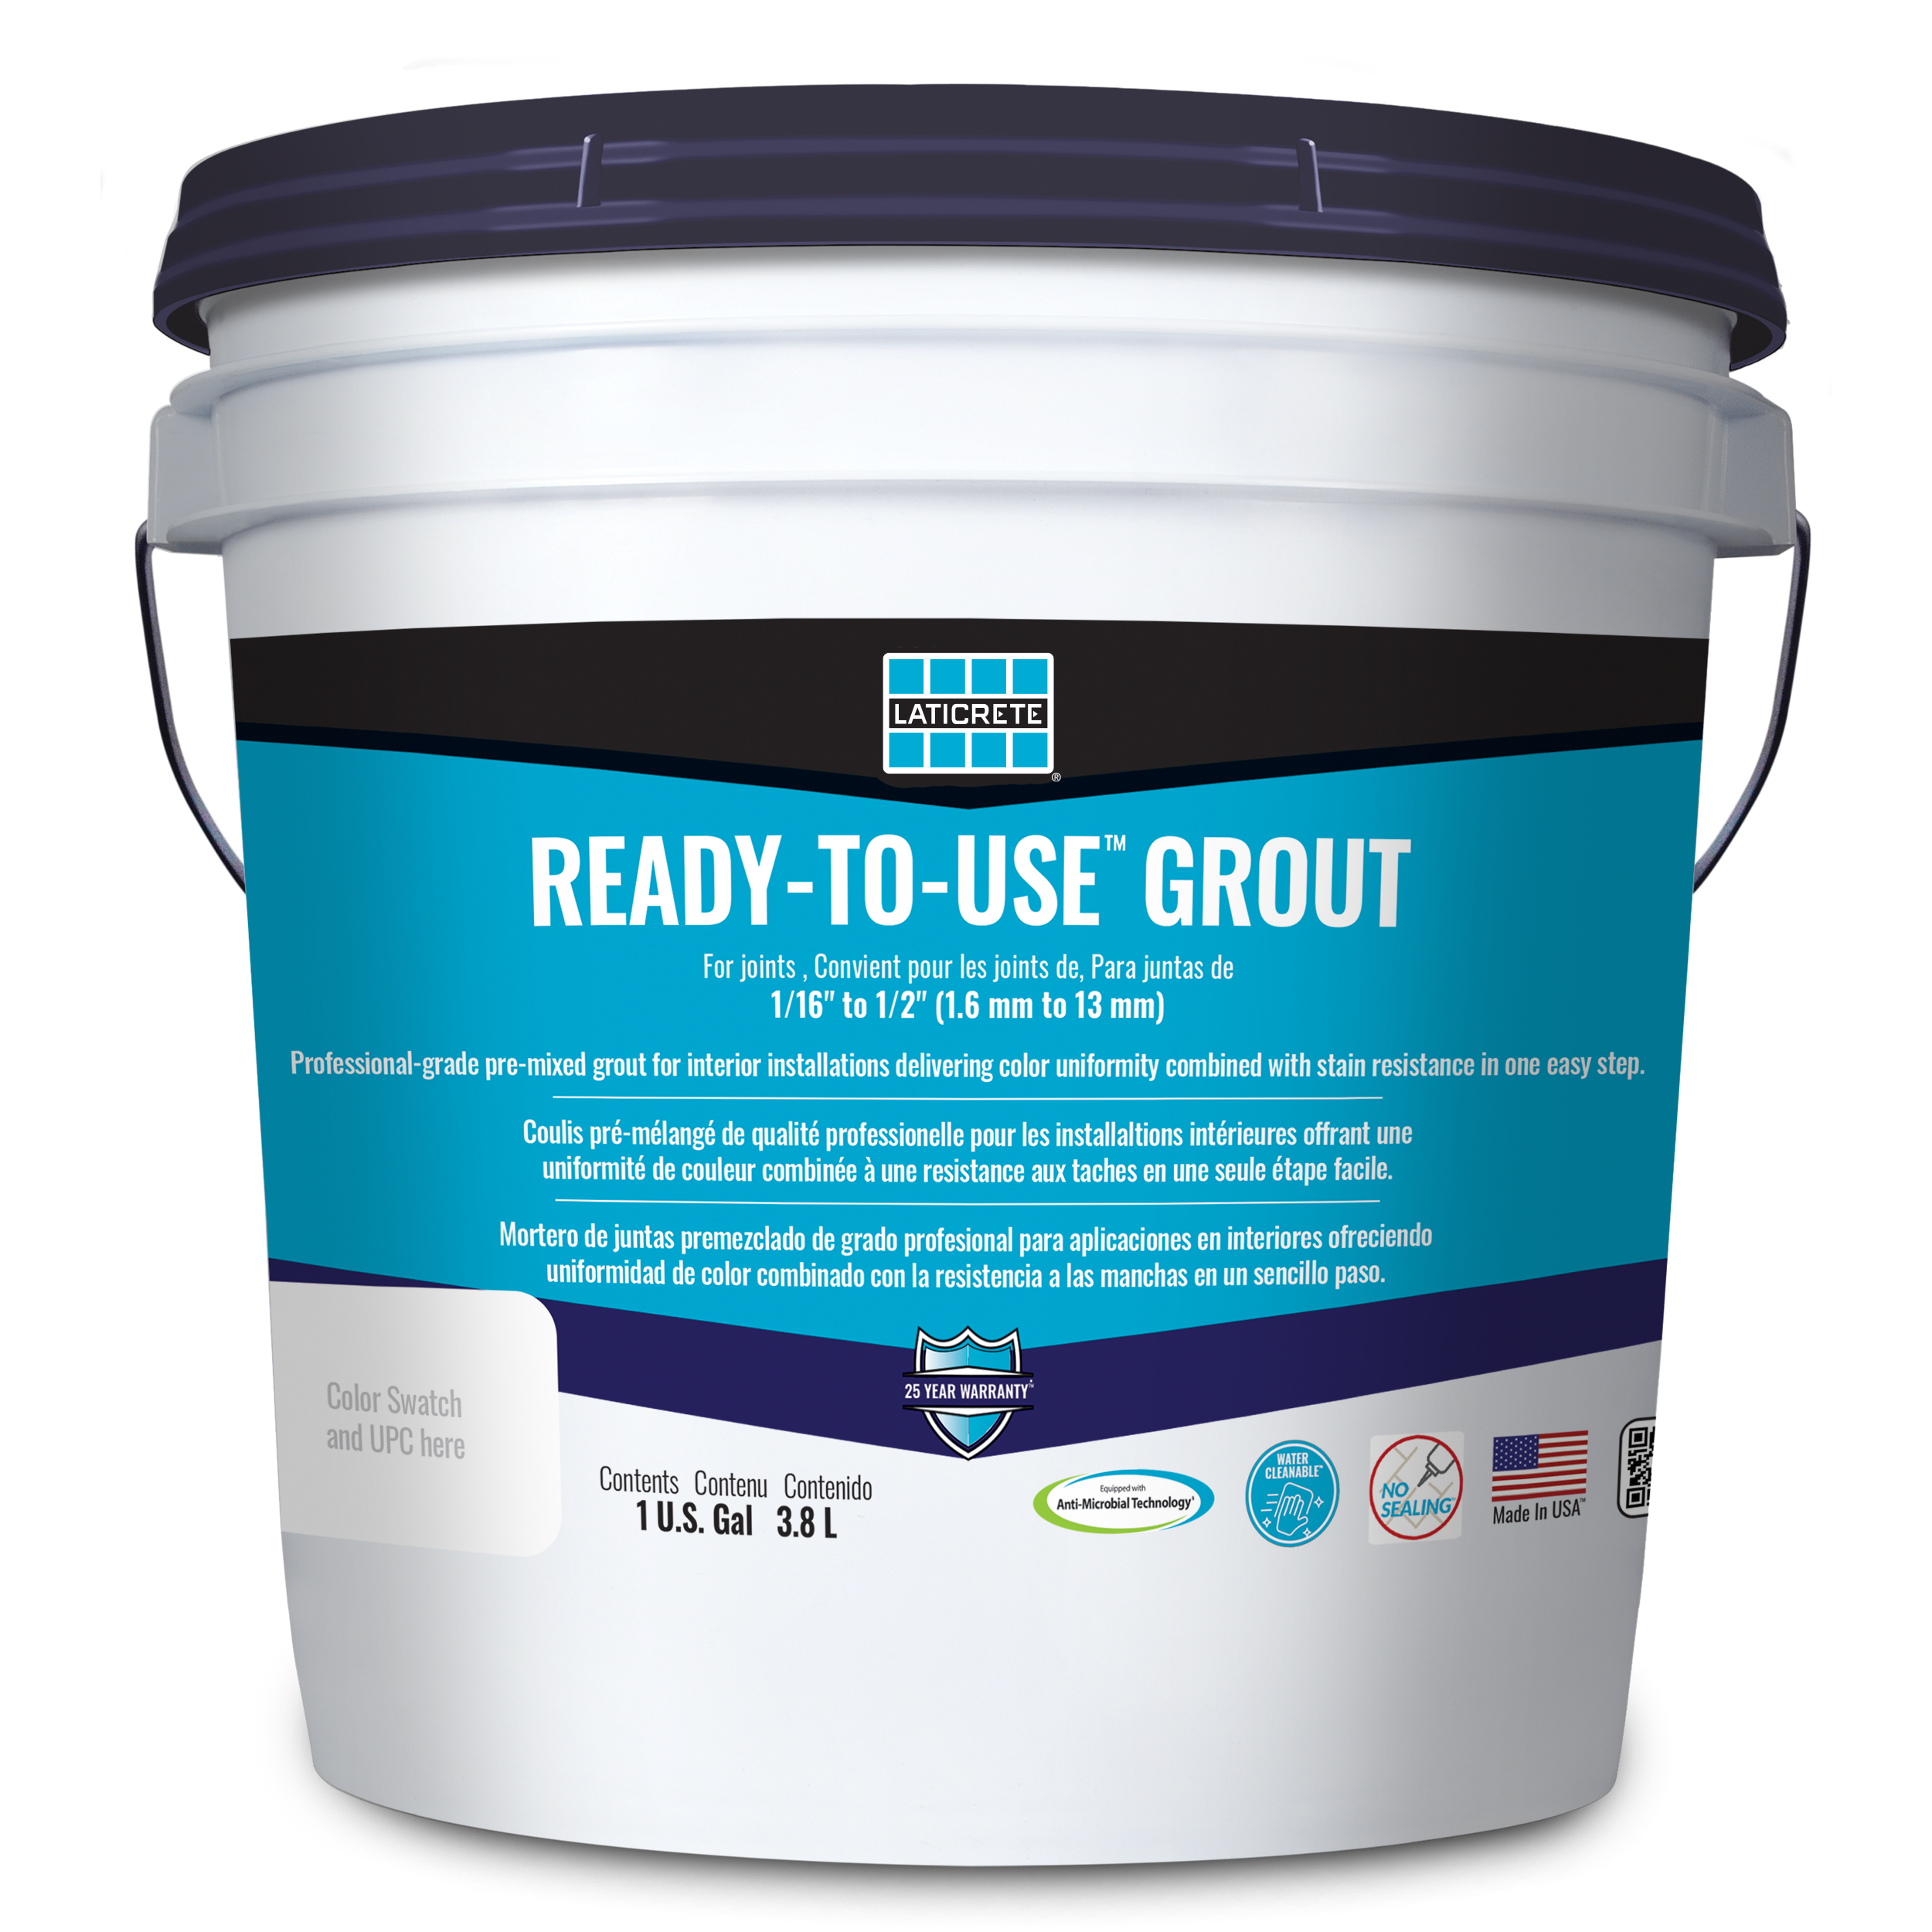 READY-TO-USE Pre-Mixed Grout